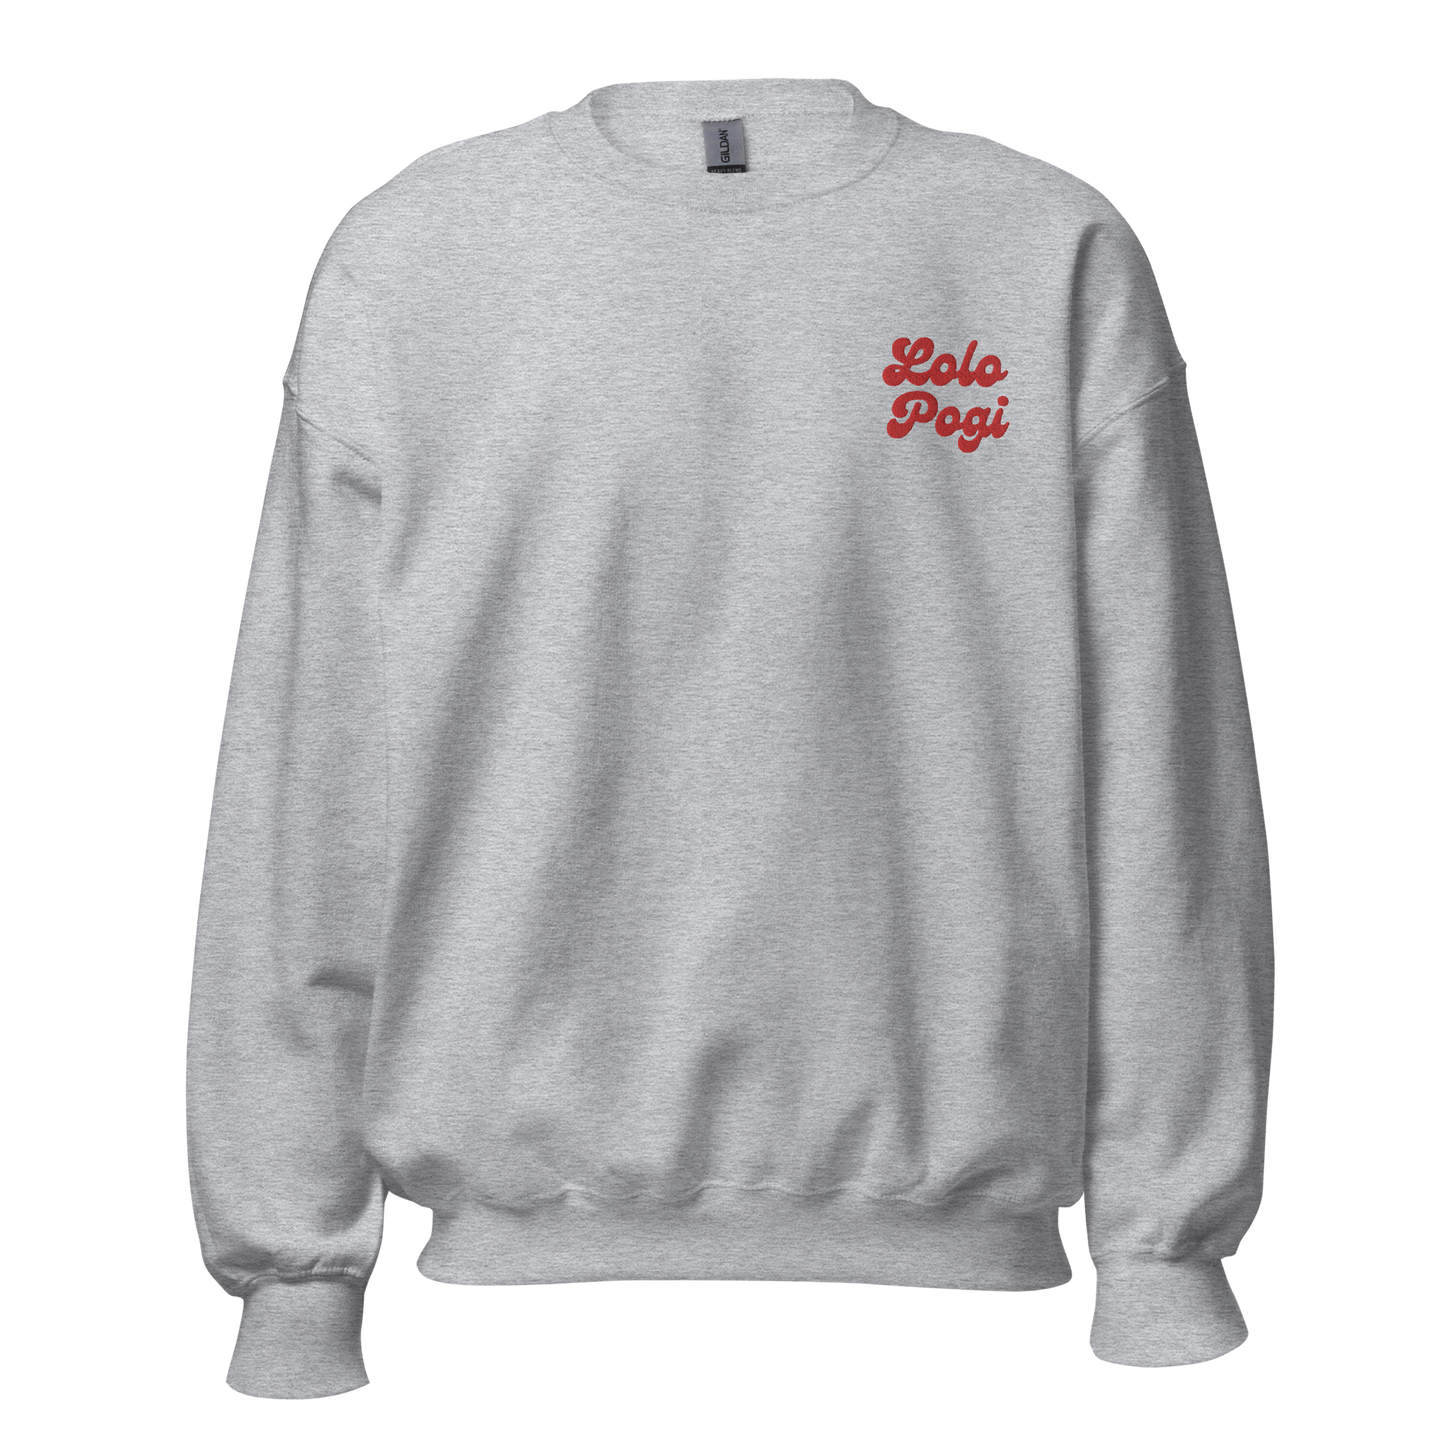 Filipino Sweatshirt Crew Neck Lolo Pogi Grandfather Embroidered Father's Day Gift in color variant Sport Gray